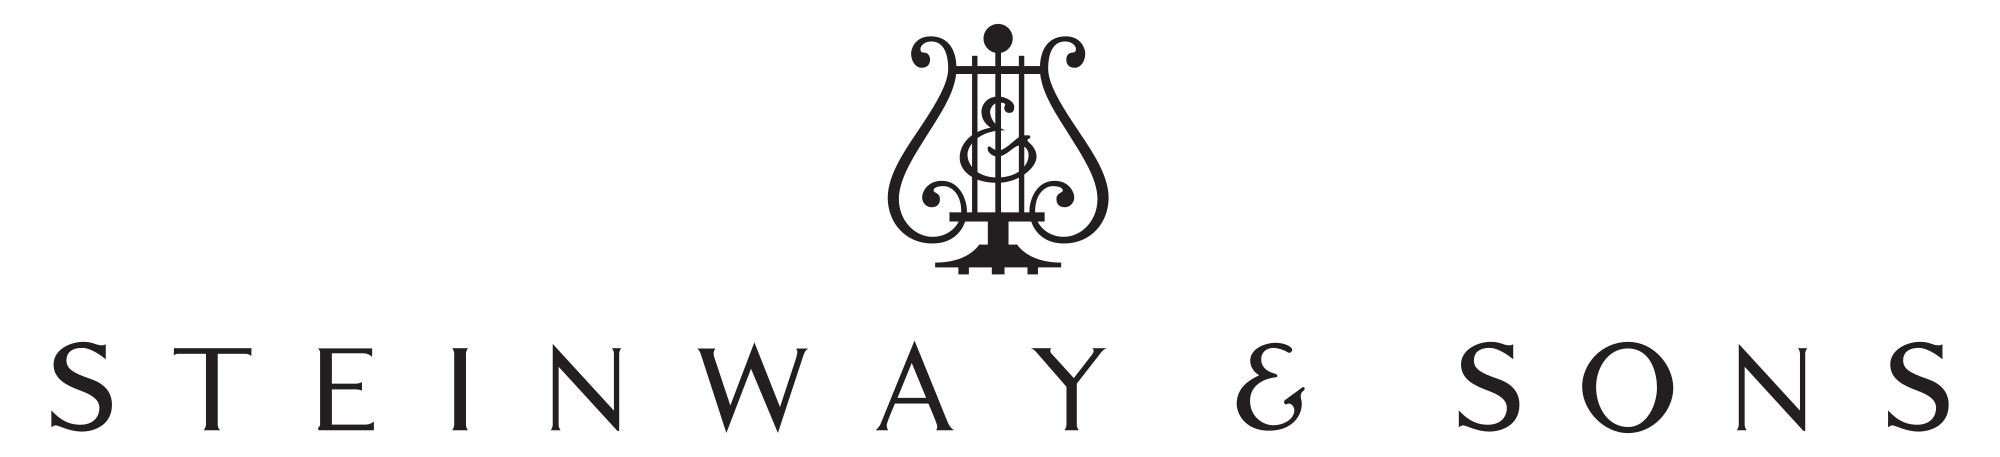 Steinway Logo - File:Steinway and Sons logo.svg - Wikimedia Commons